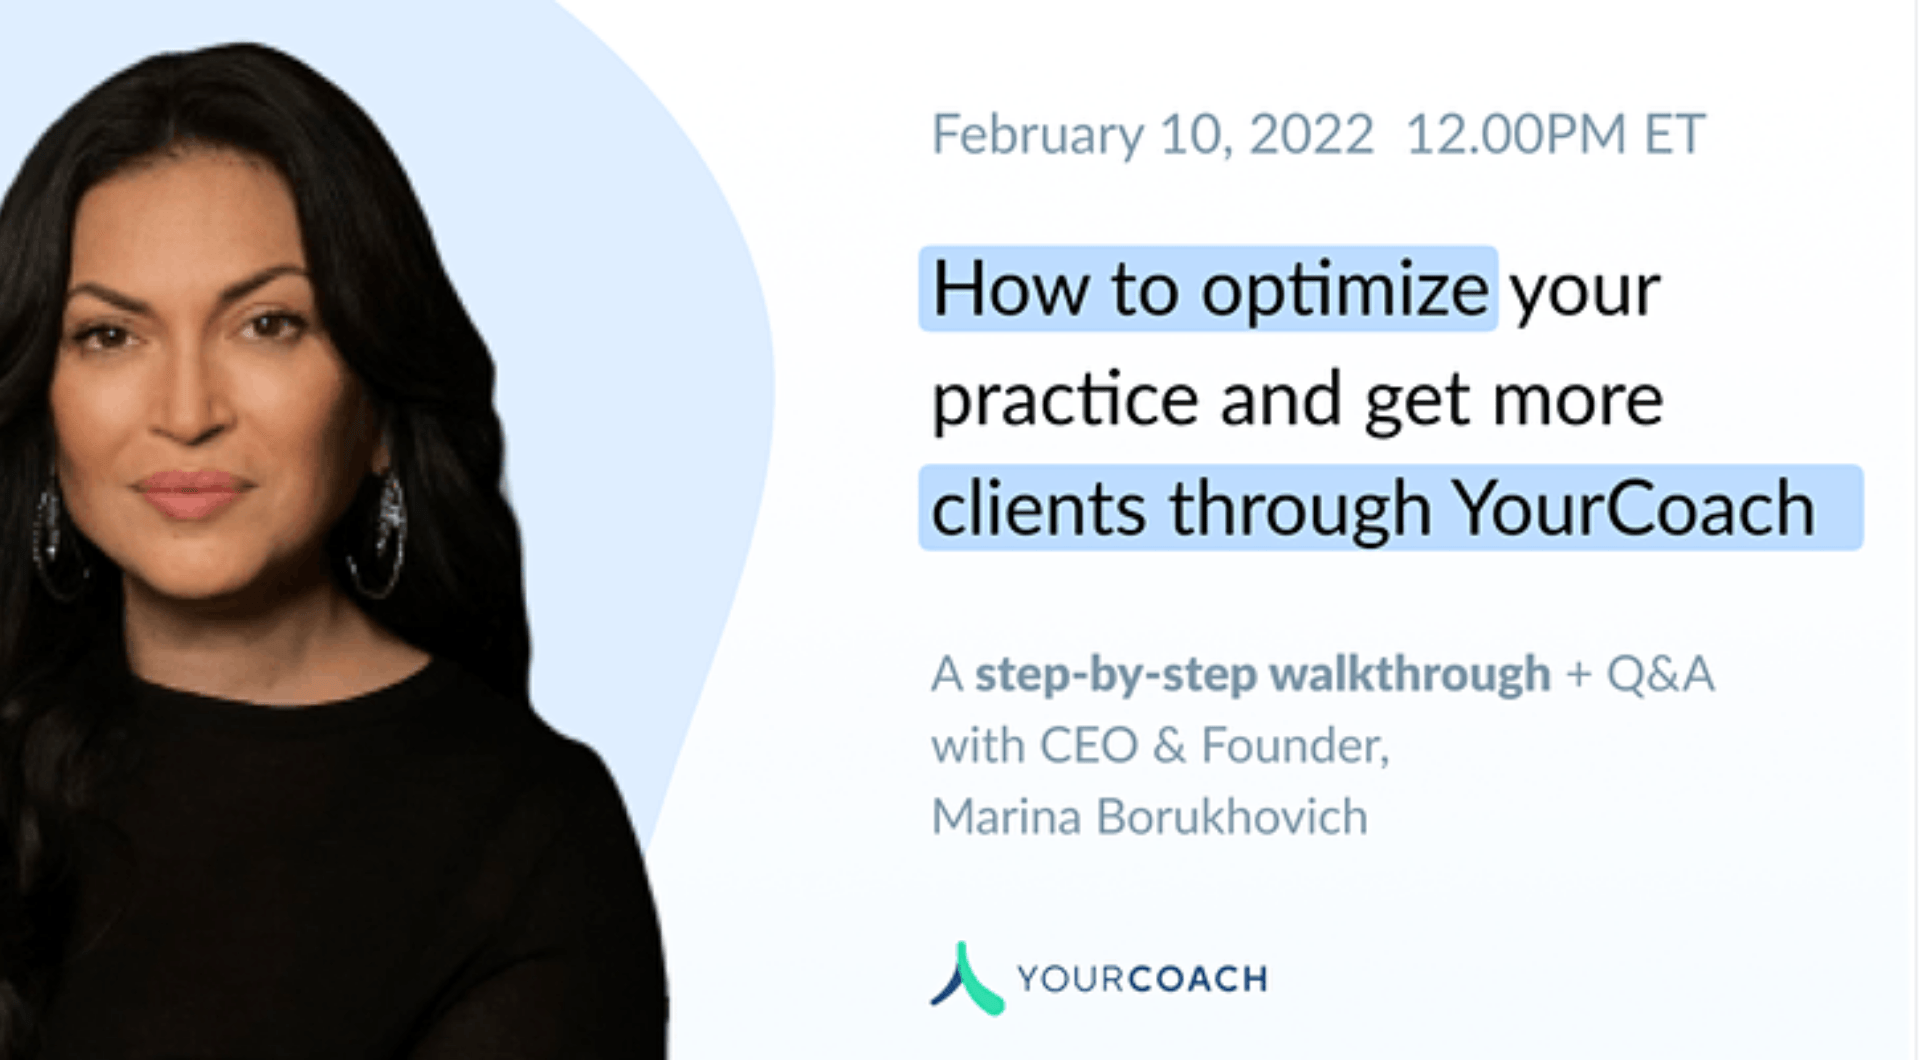 optimize your practice and get more clients through YourCoach